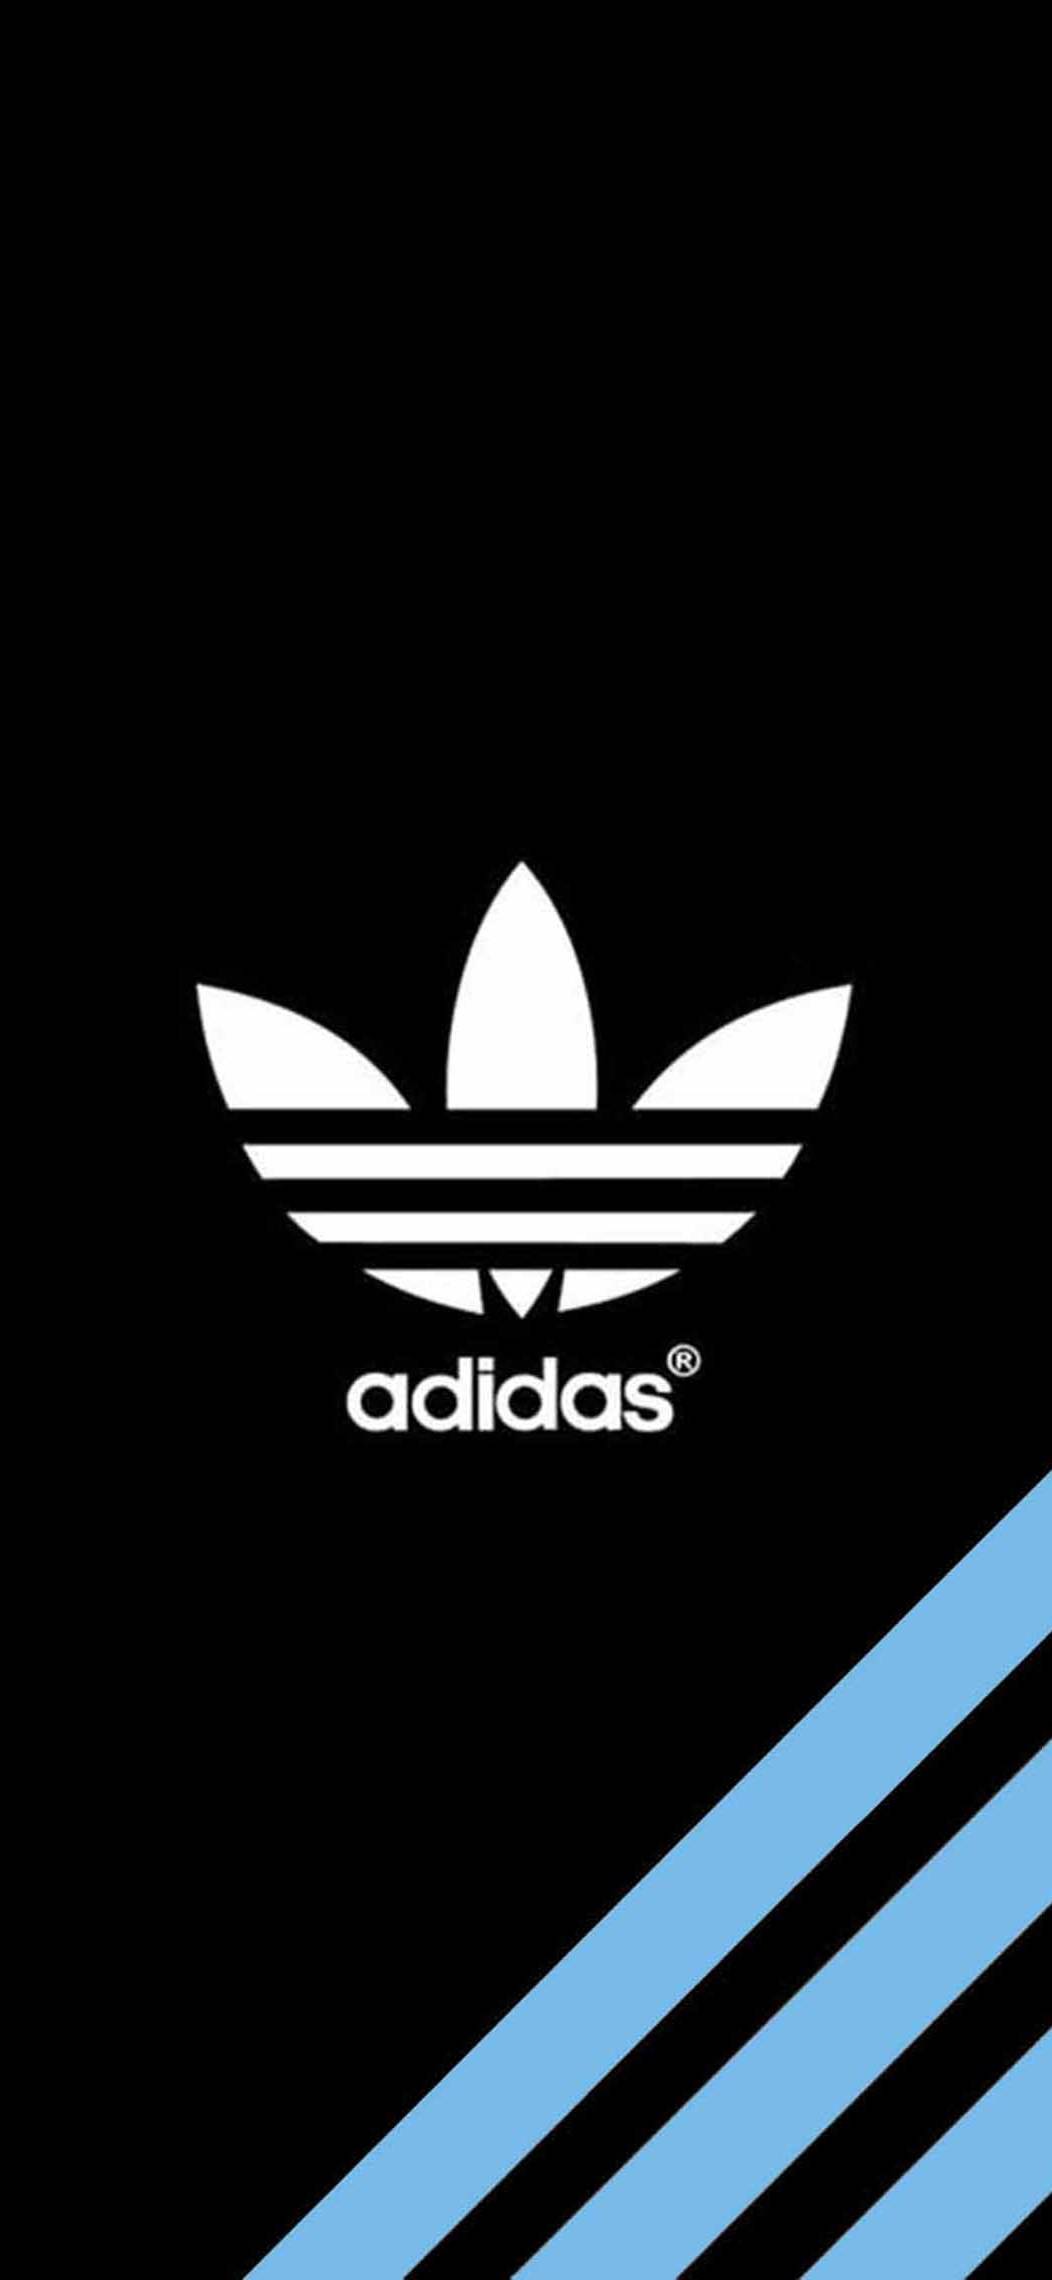 grown up Advertiser lecture Adidas Wallpapers: Top Best 65 Adidas Backgrounds Download